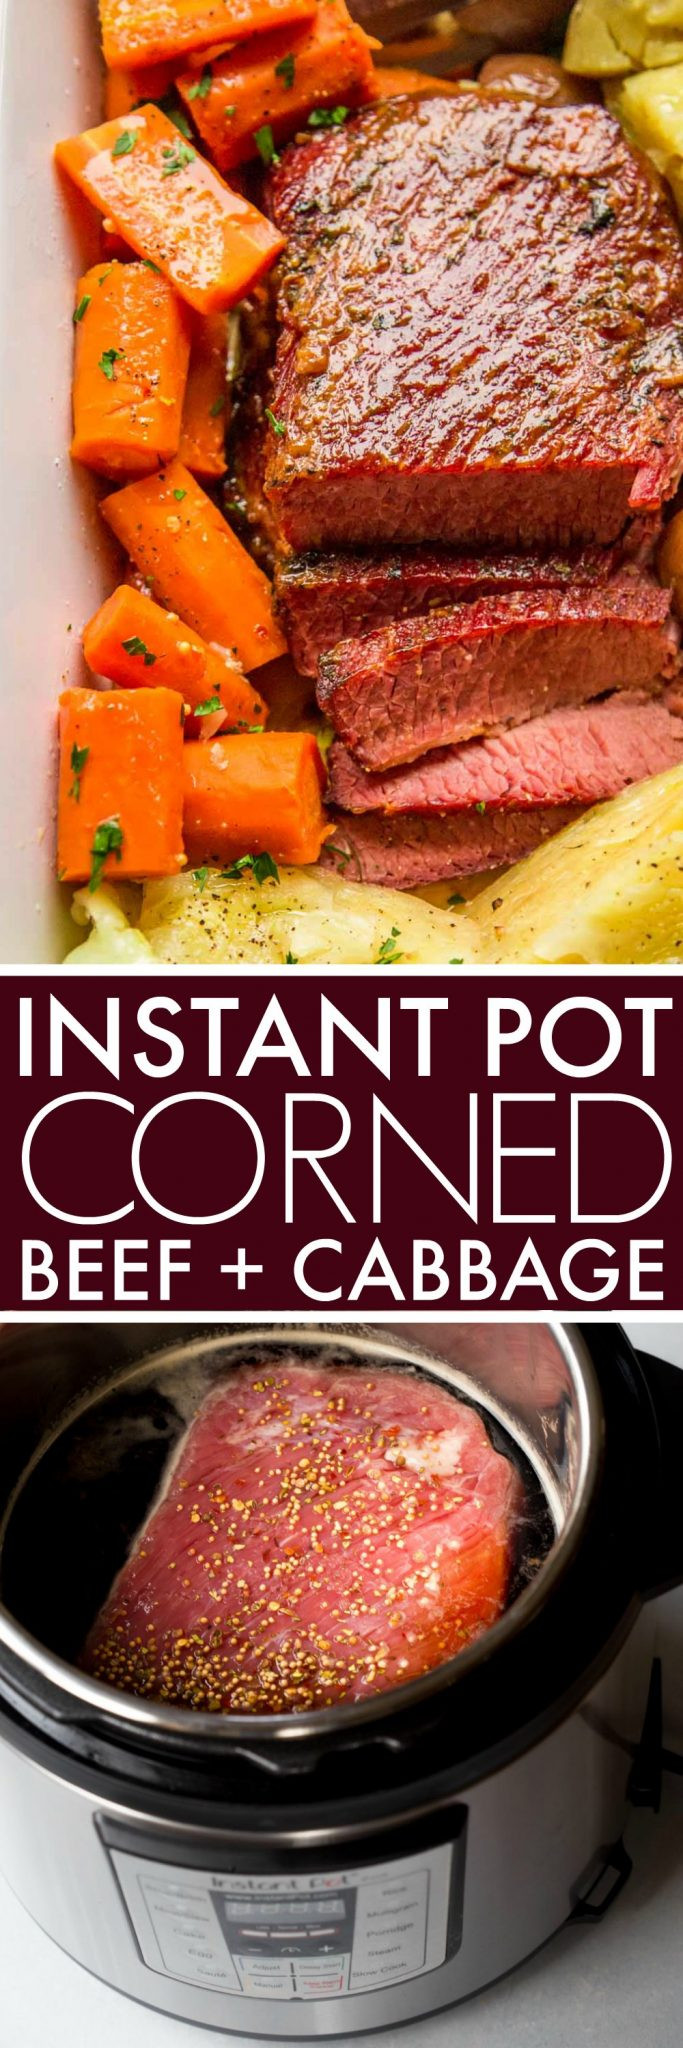 Corn Beef And Cabbage Instant Pot
 Instant Pot Glazed Corned Beef & Cabbage